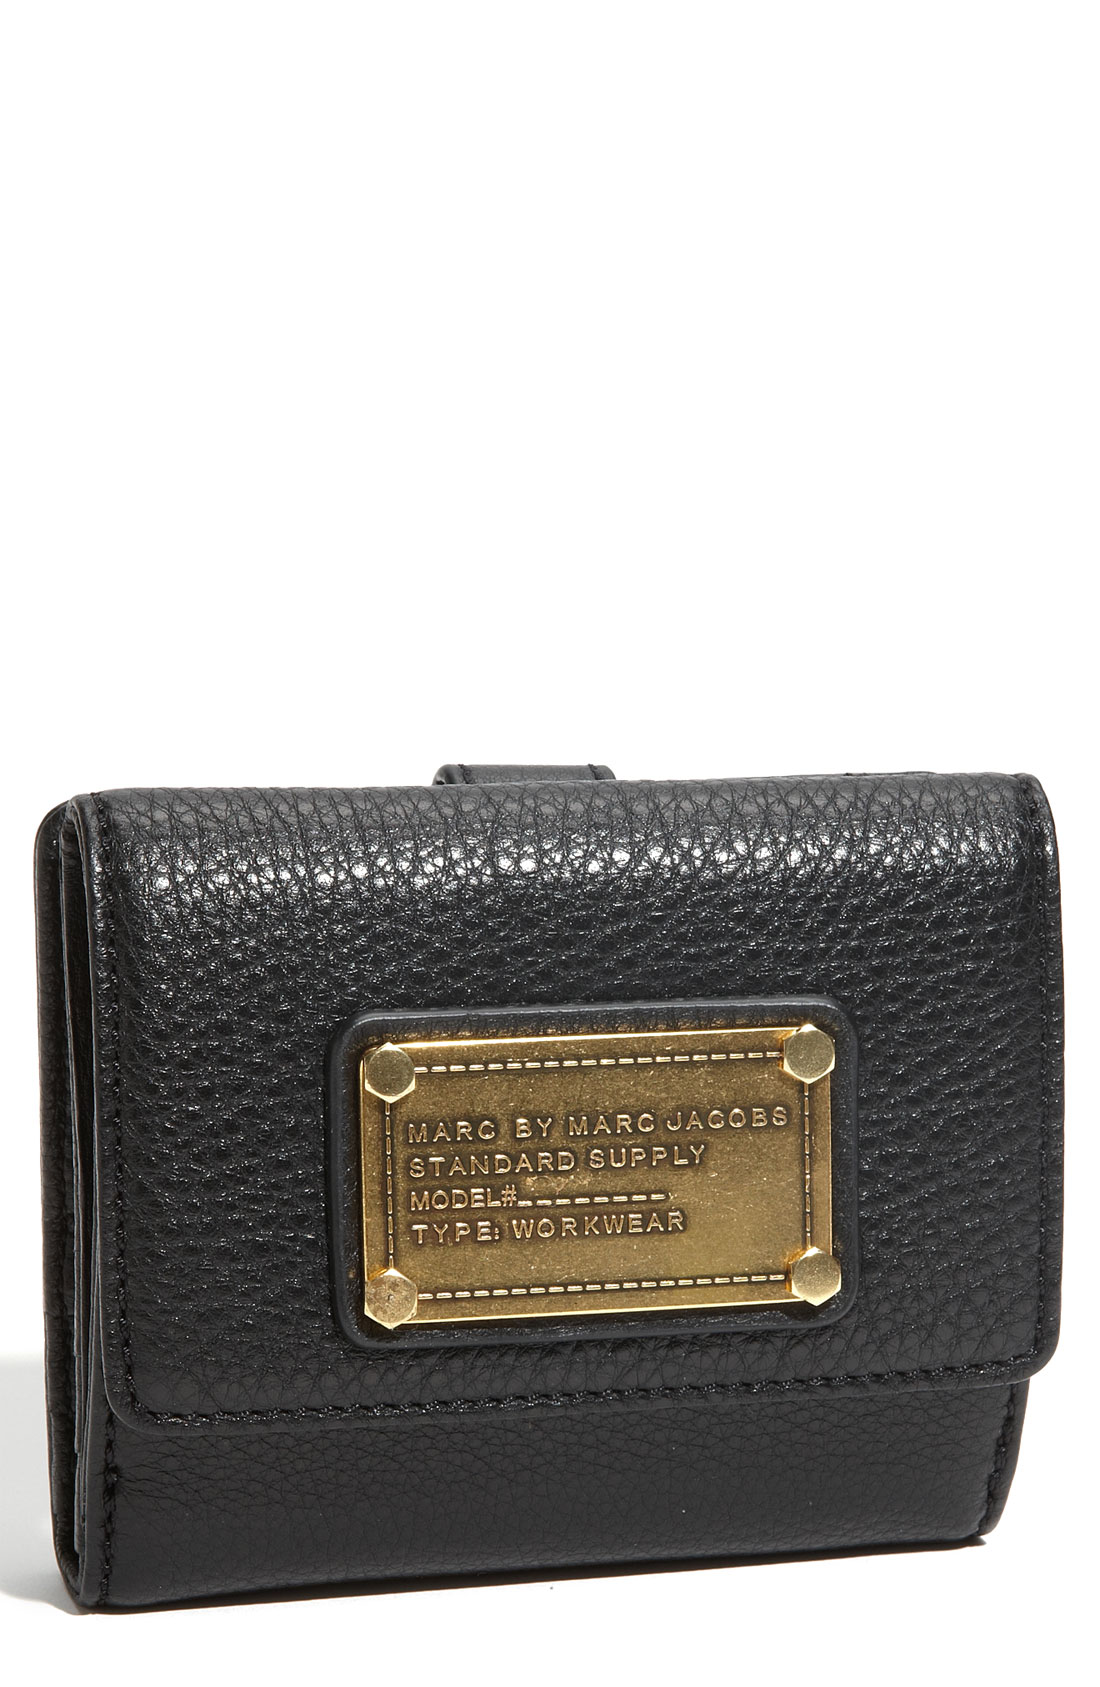 Marc by marc jacobs Classic Q Small French Purse in Black | Lyst